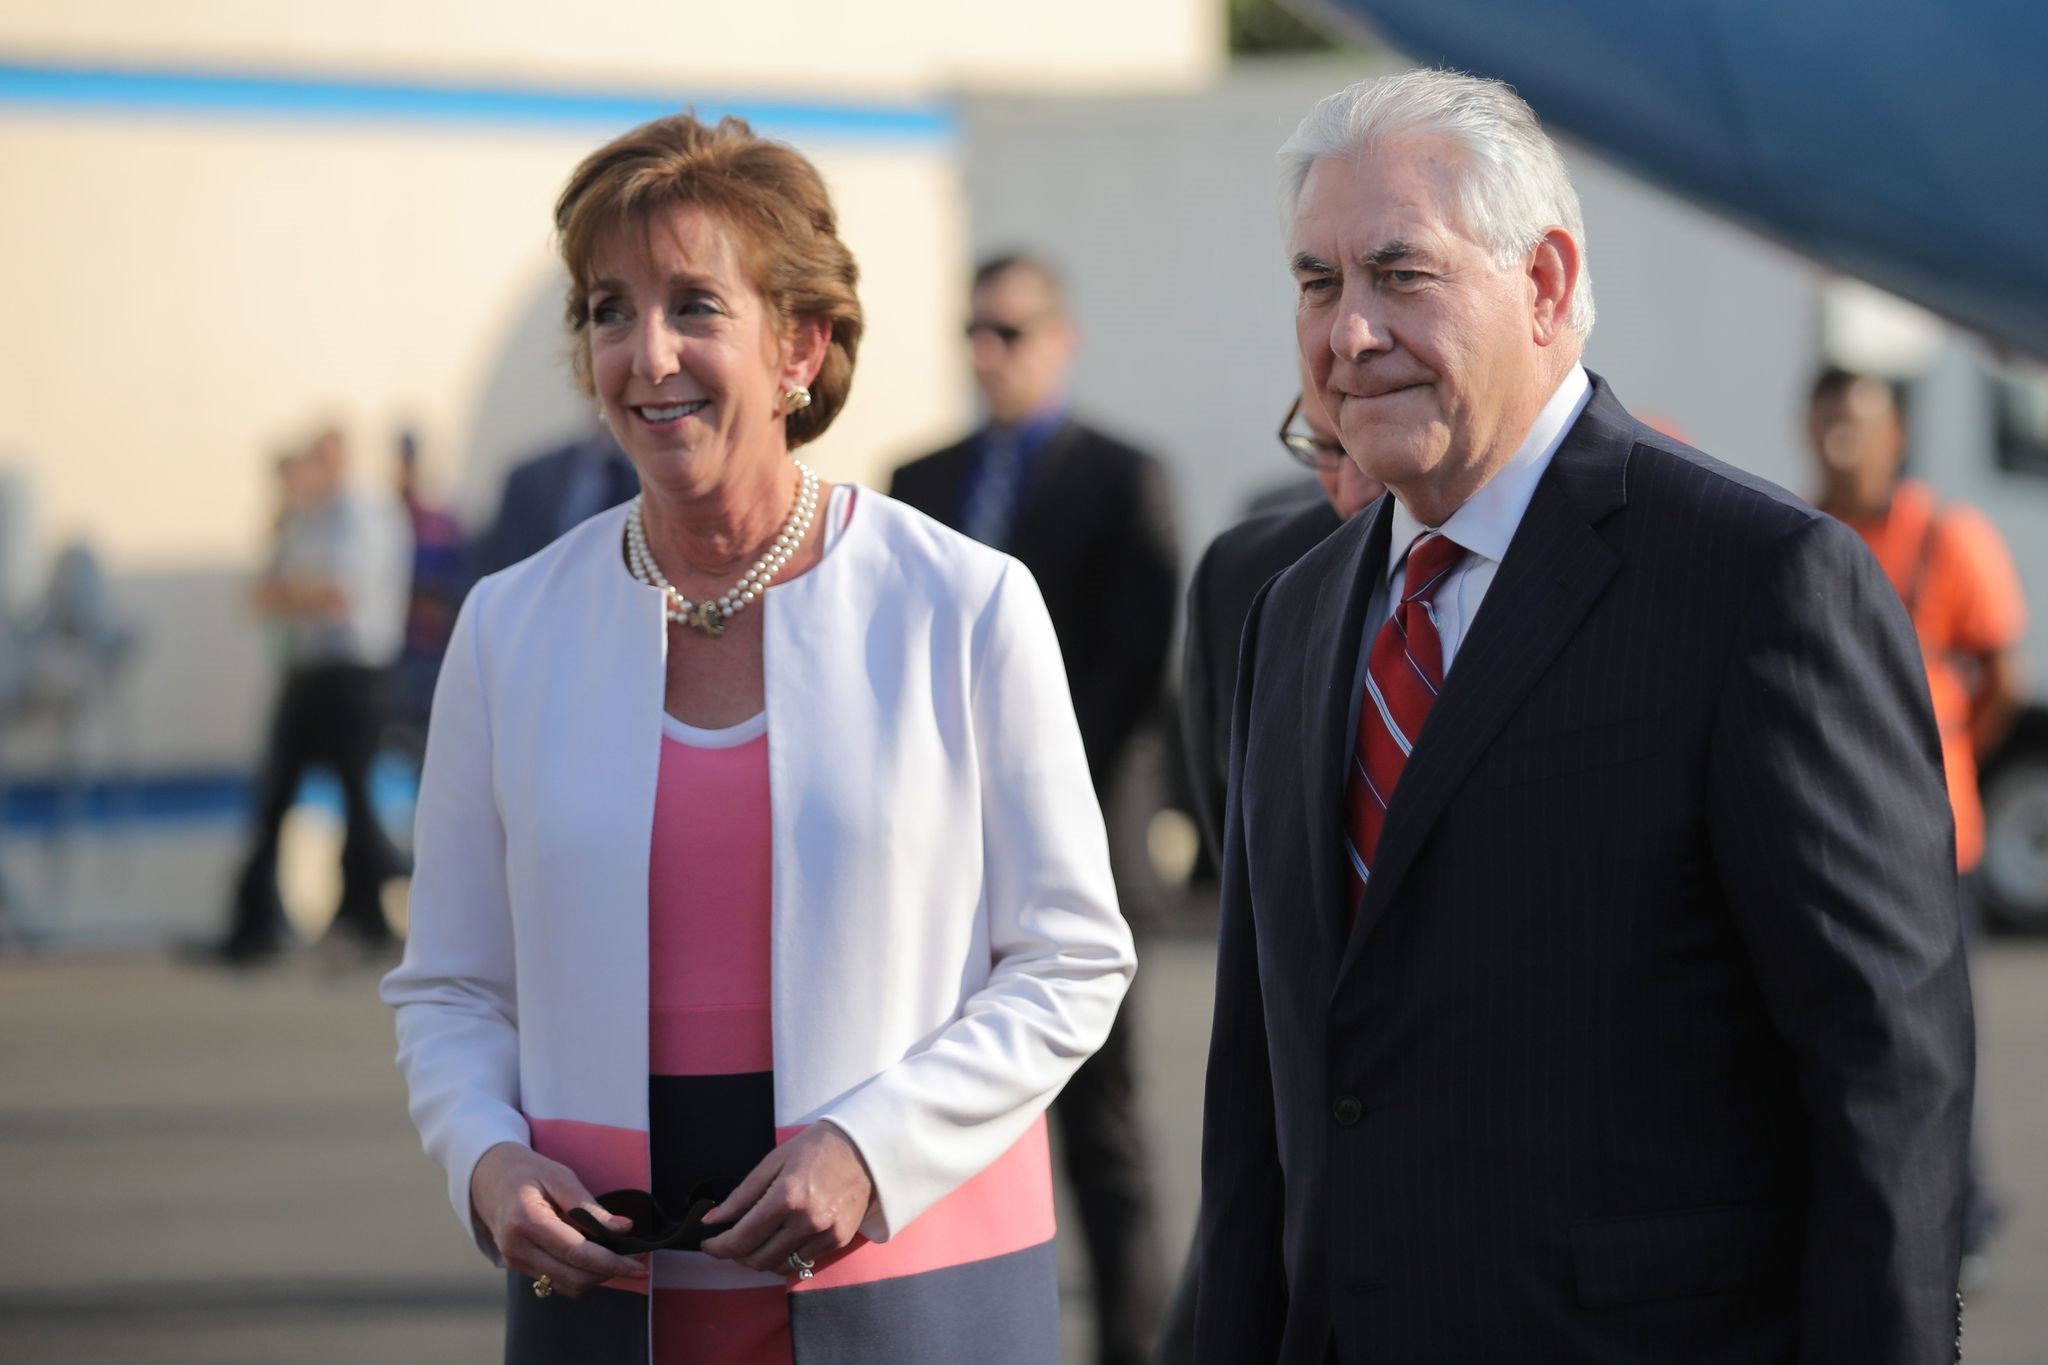 In this file photo taken on December 19, 2016 US Secretary of State Rex Tillerson is welcomed by US ambassador Roberta Jacobson (L) as he arrives at Benito Juarez international Airport in Mexico City, Mexico. (AFP PHOTO)